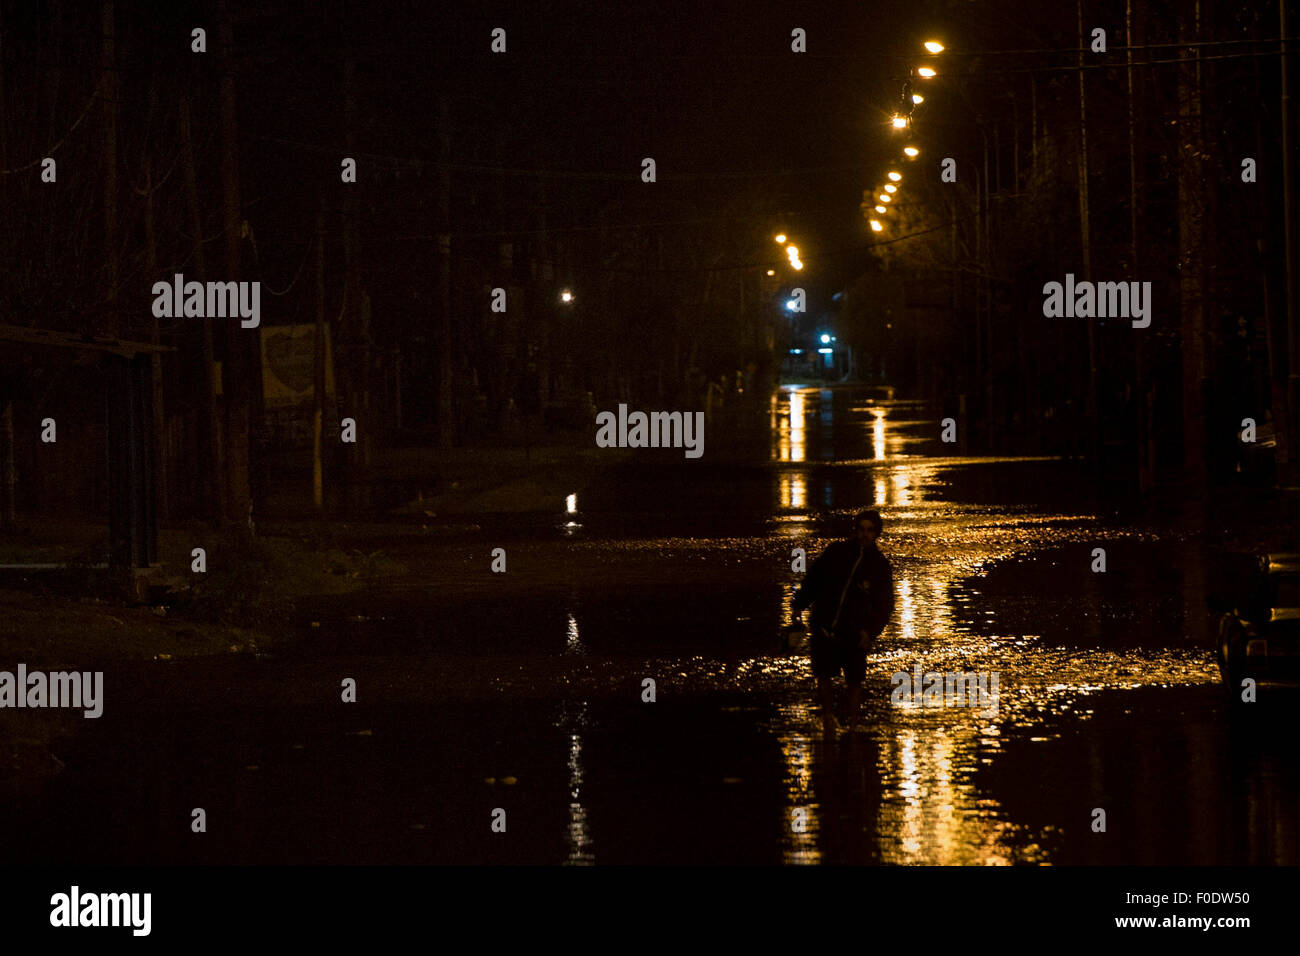 (150813) -- QUILMES, Aug. 13, 2015 (Xinhua) -- A resident walks through flood in Quilmes town, Buenos Aires province, Argentina, during the early hours of Aug. 13, 2015. Argentina's President Cristina Fernandez called on Wednesday to 'double the aid to the affected people by the floods in Buenos Aires province', said the Minister of Economy, Axel Kicillof. The floods left three people dead and some 20,000 evacuated in the past few days in the country, according to local press. (Xinhua/Carlos Brigo/TELAM) Stock Photo